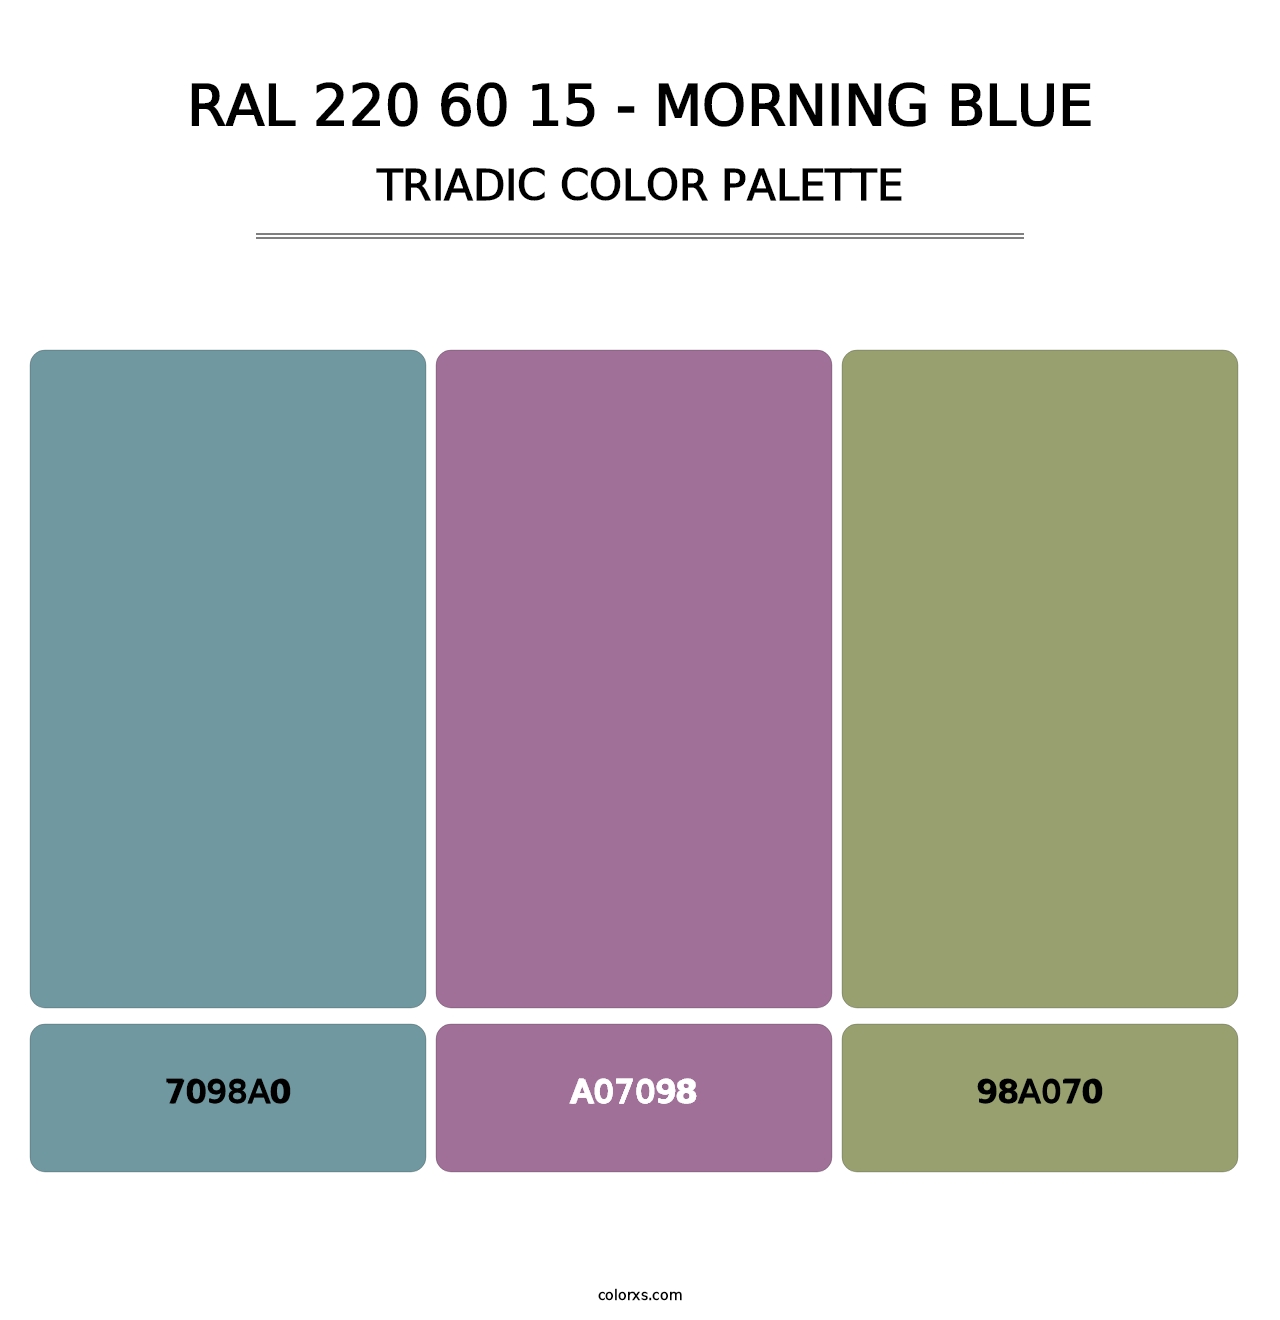 RAL 220 60 15 - Morning Blue - Triadic Color Palette